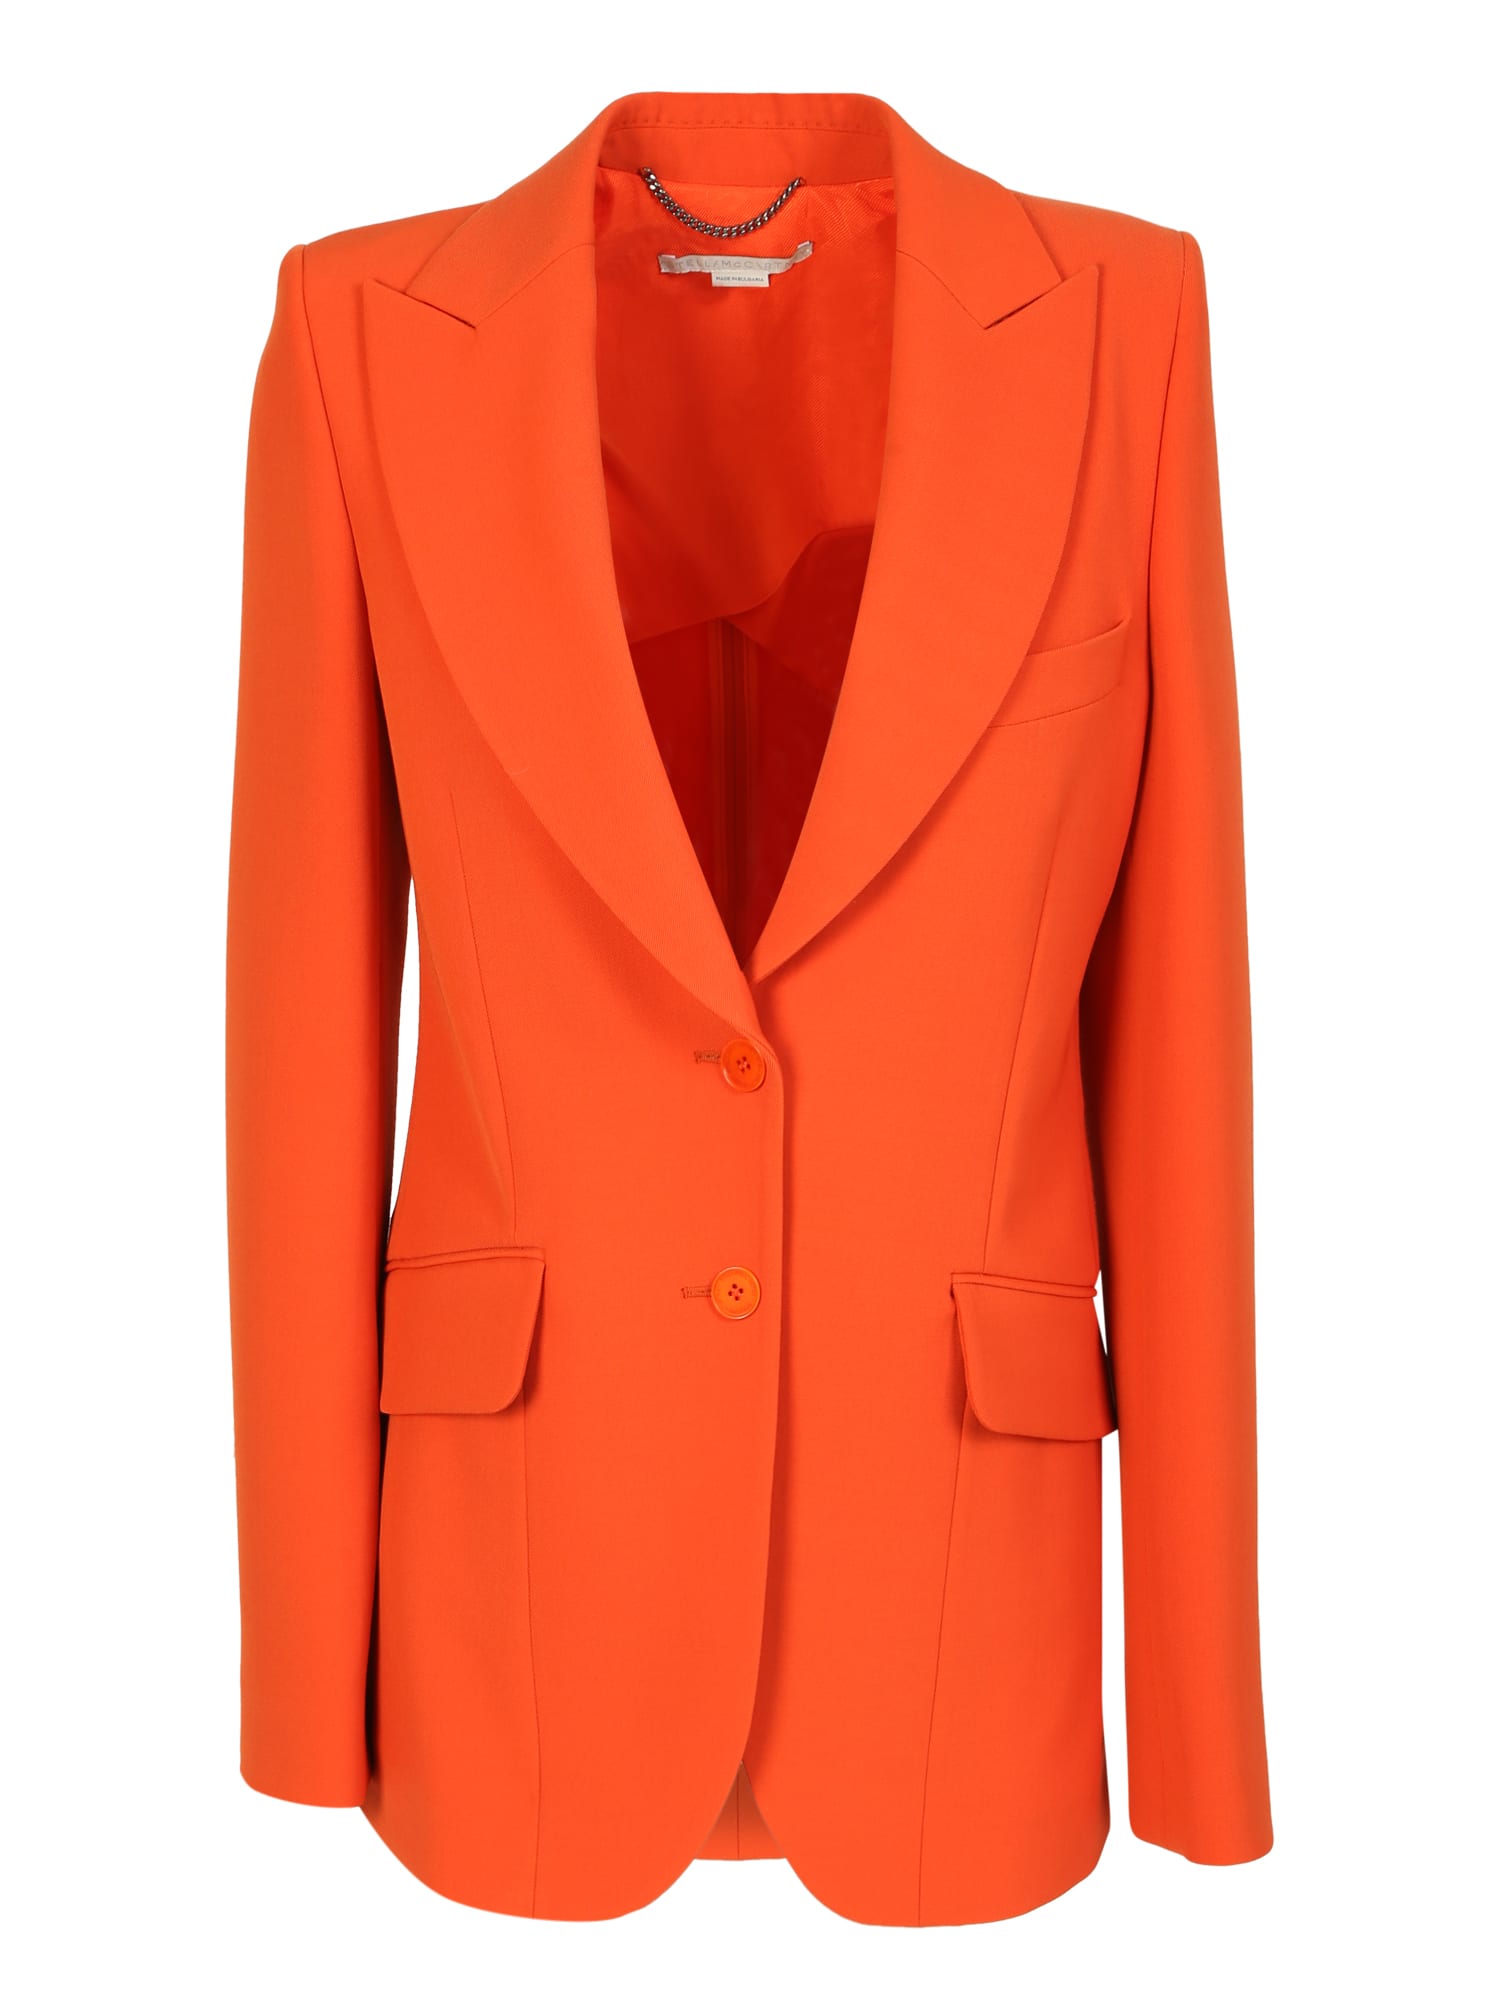 The Jacket Is One Of Those Items That Cannot Be Missing In The Wardrobe; This Stella Mccartney Blazer Fully Embodies Elegance And Practicality